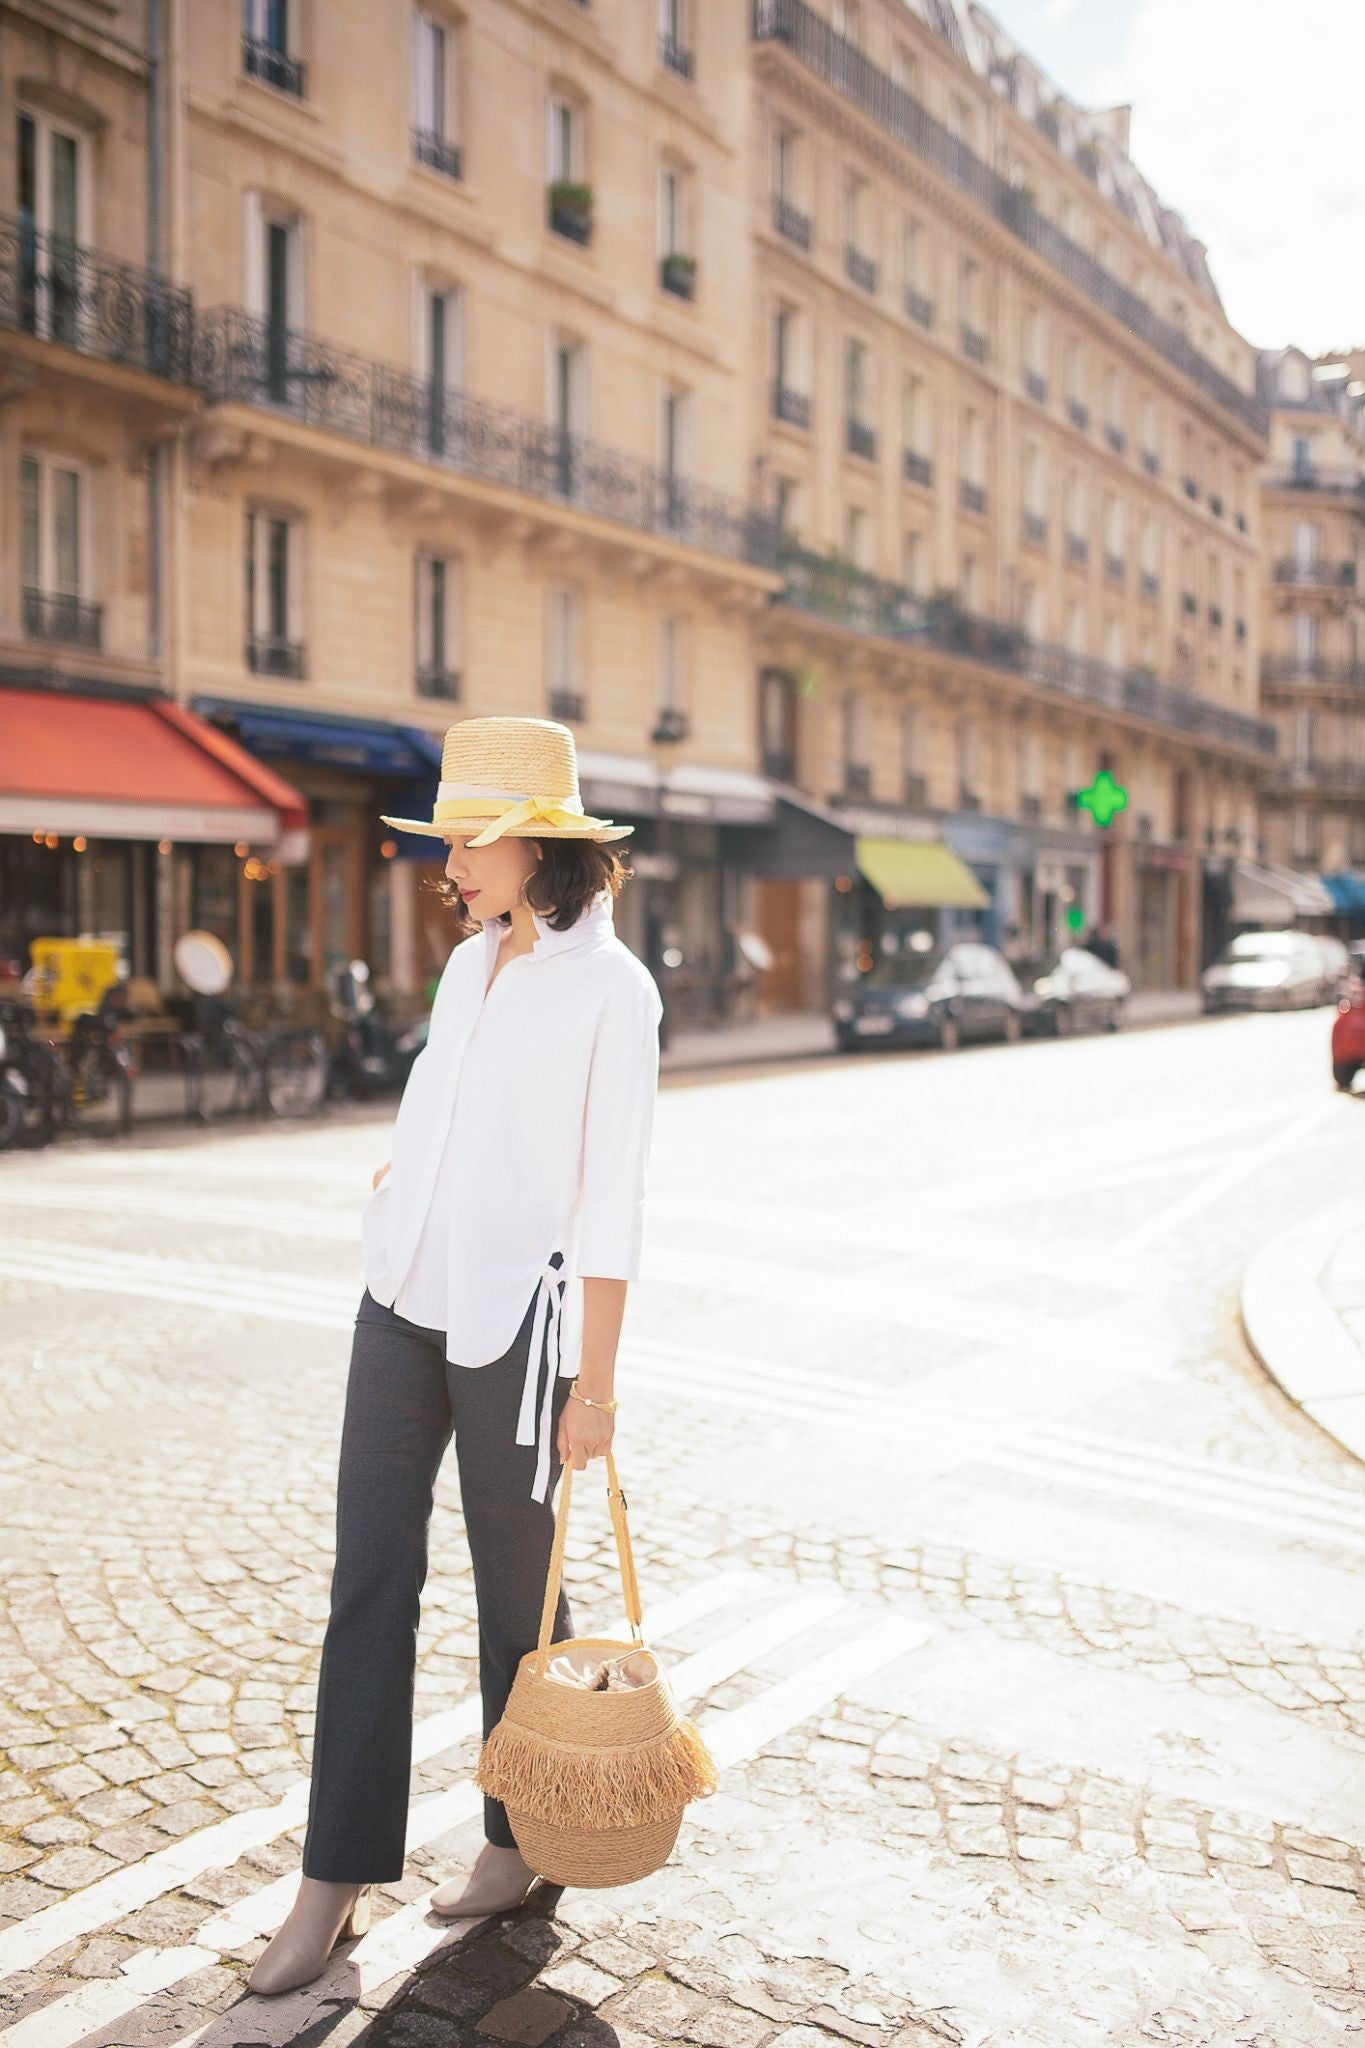 Mimi-Minh Nguyen in Paris with bucket Simon mini and Modernist hat, photo by Anh Huy Pham